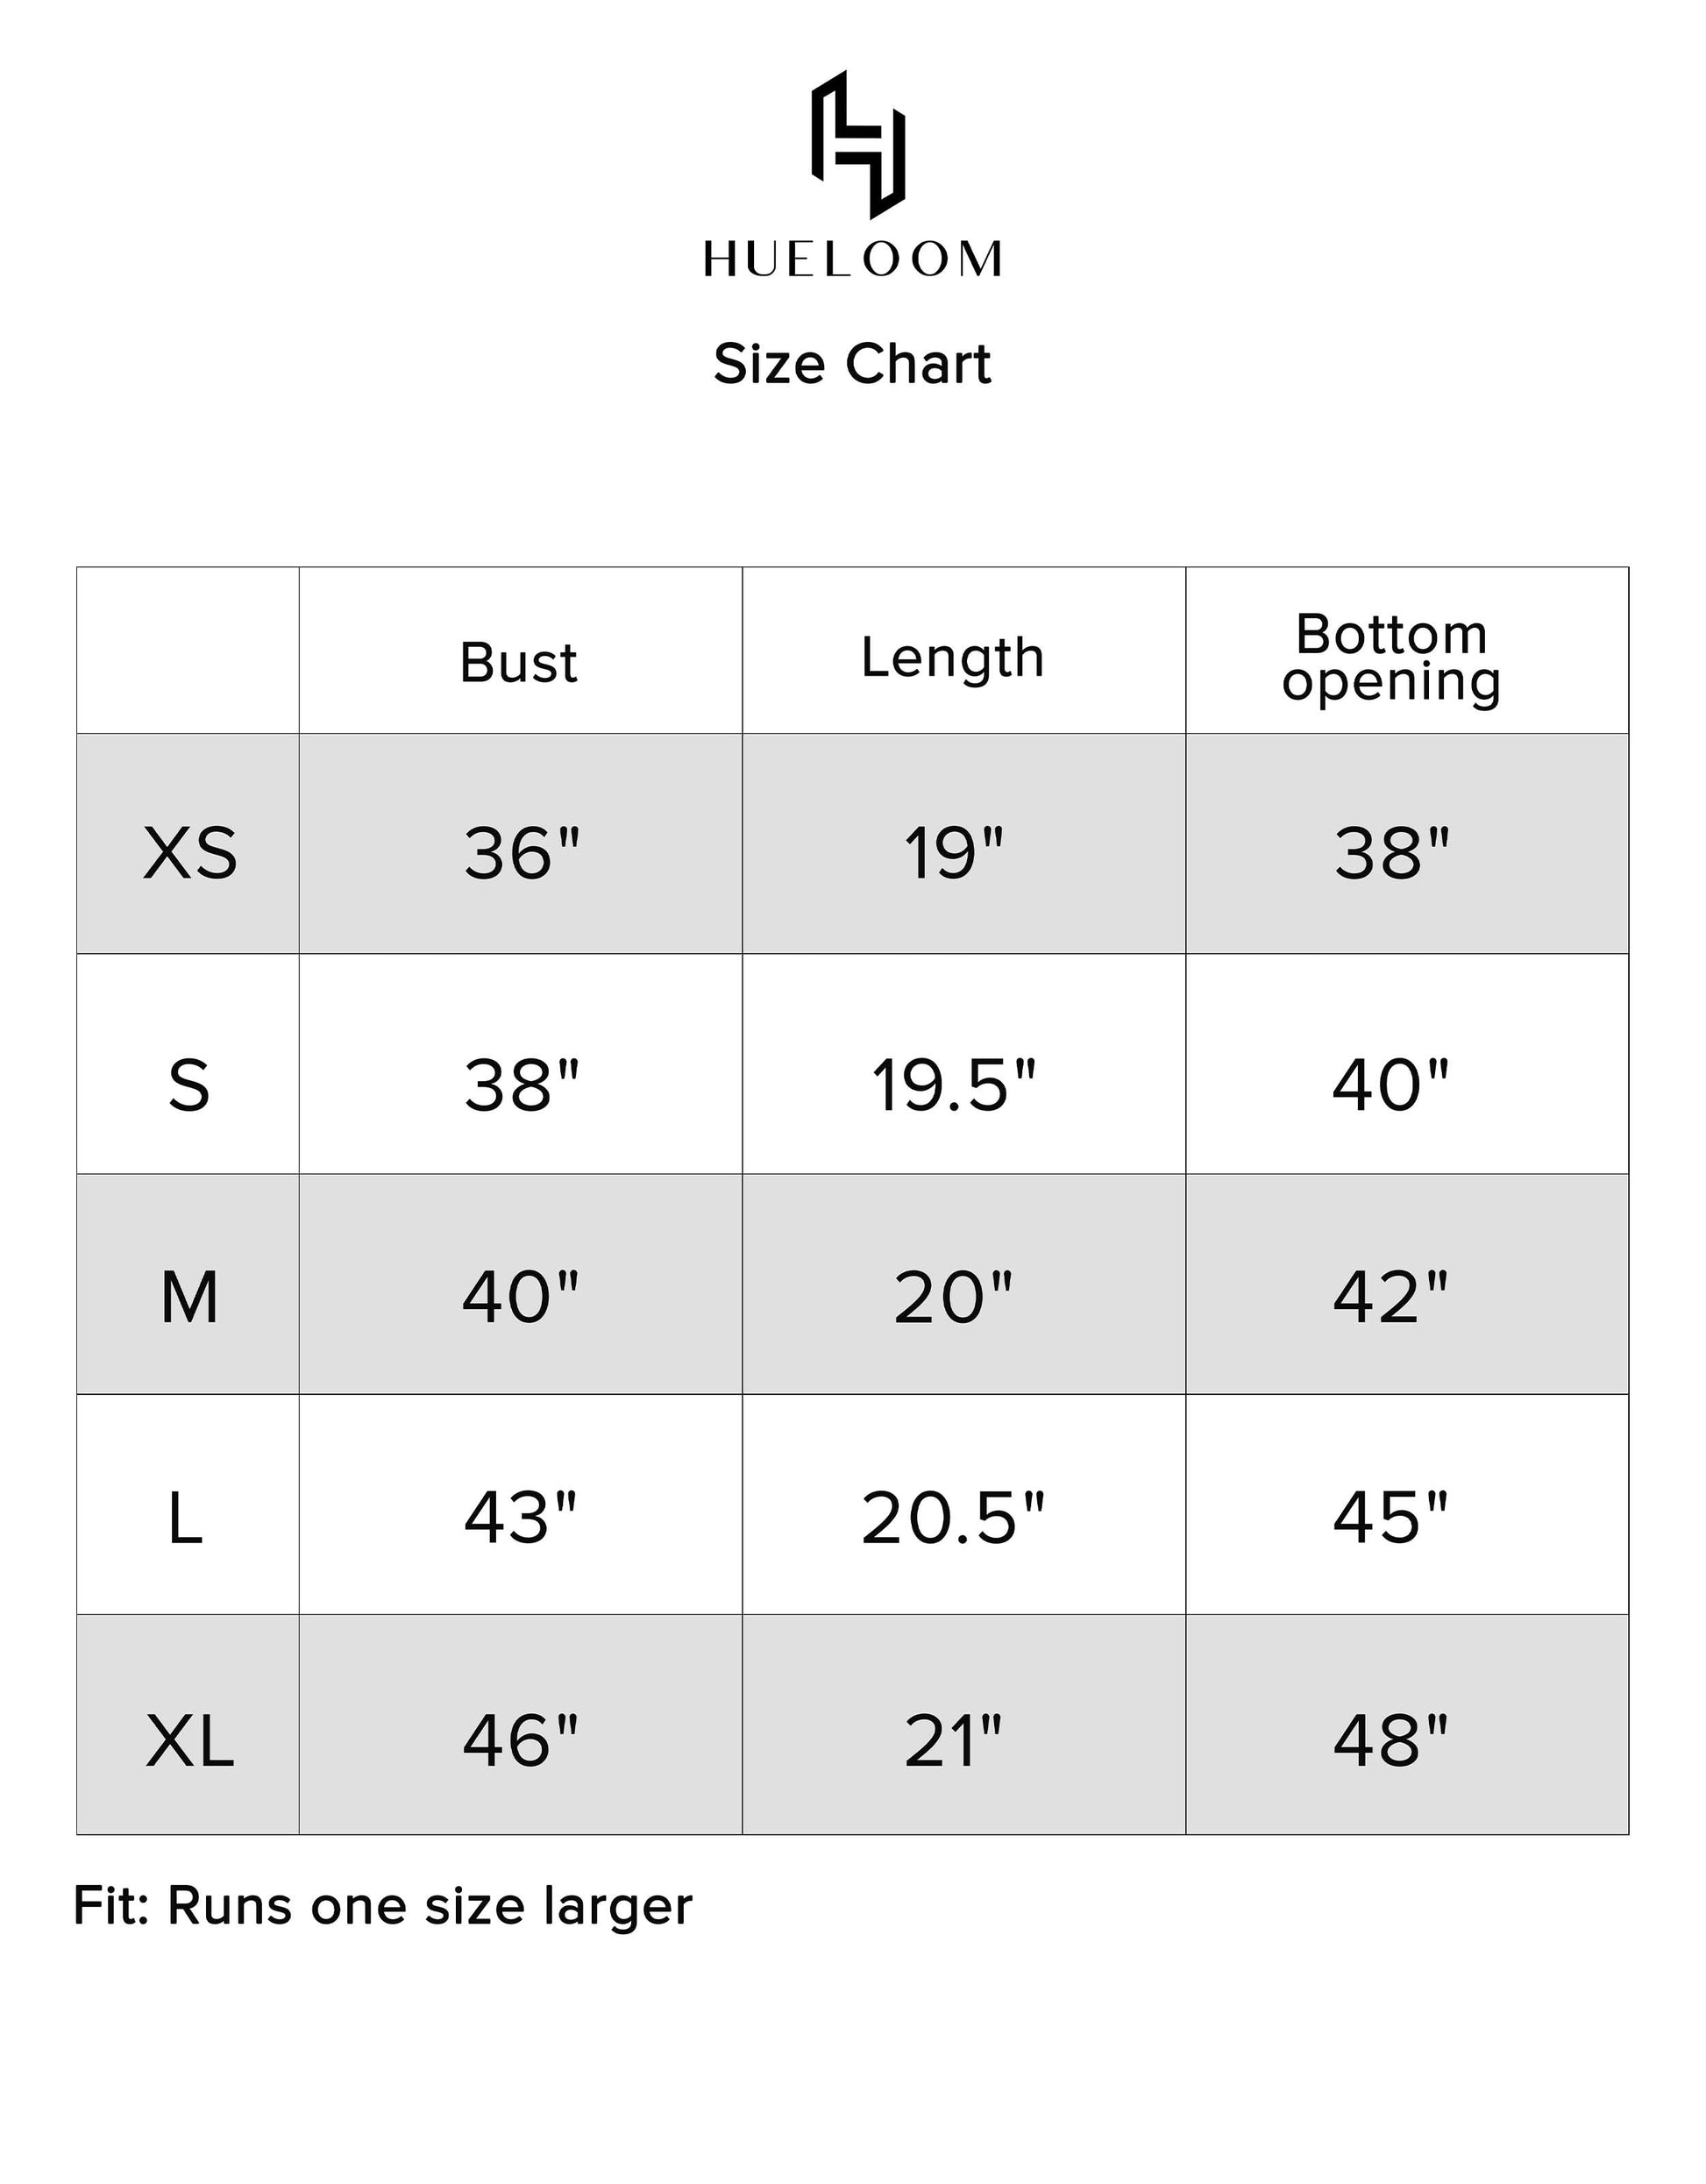 Hueloom Reversible Top size chart display for accurate sizing.